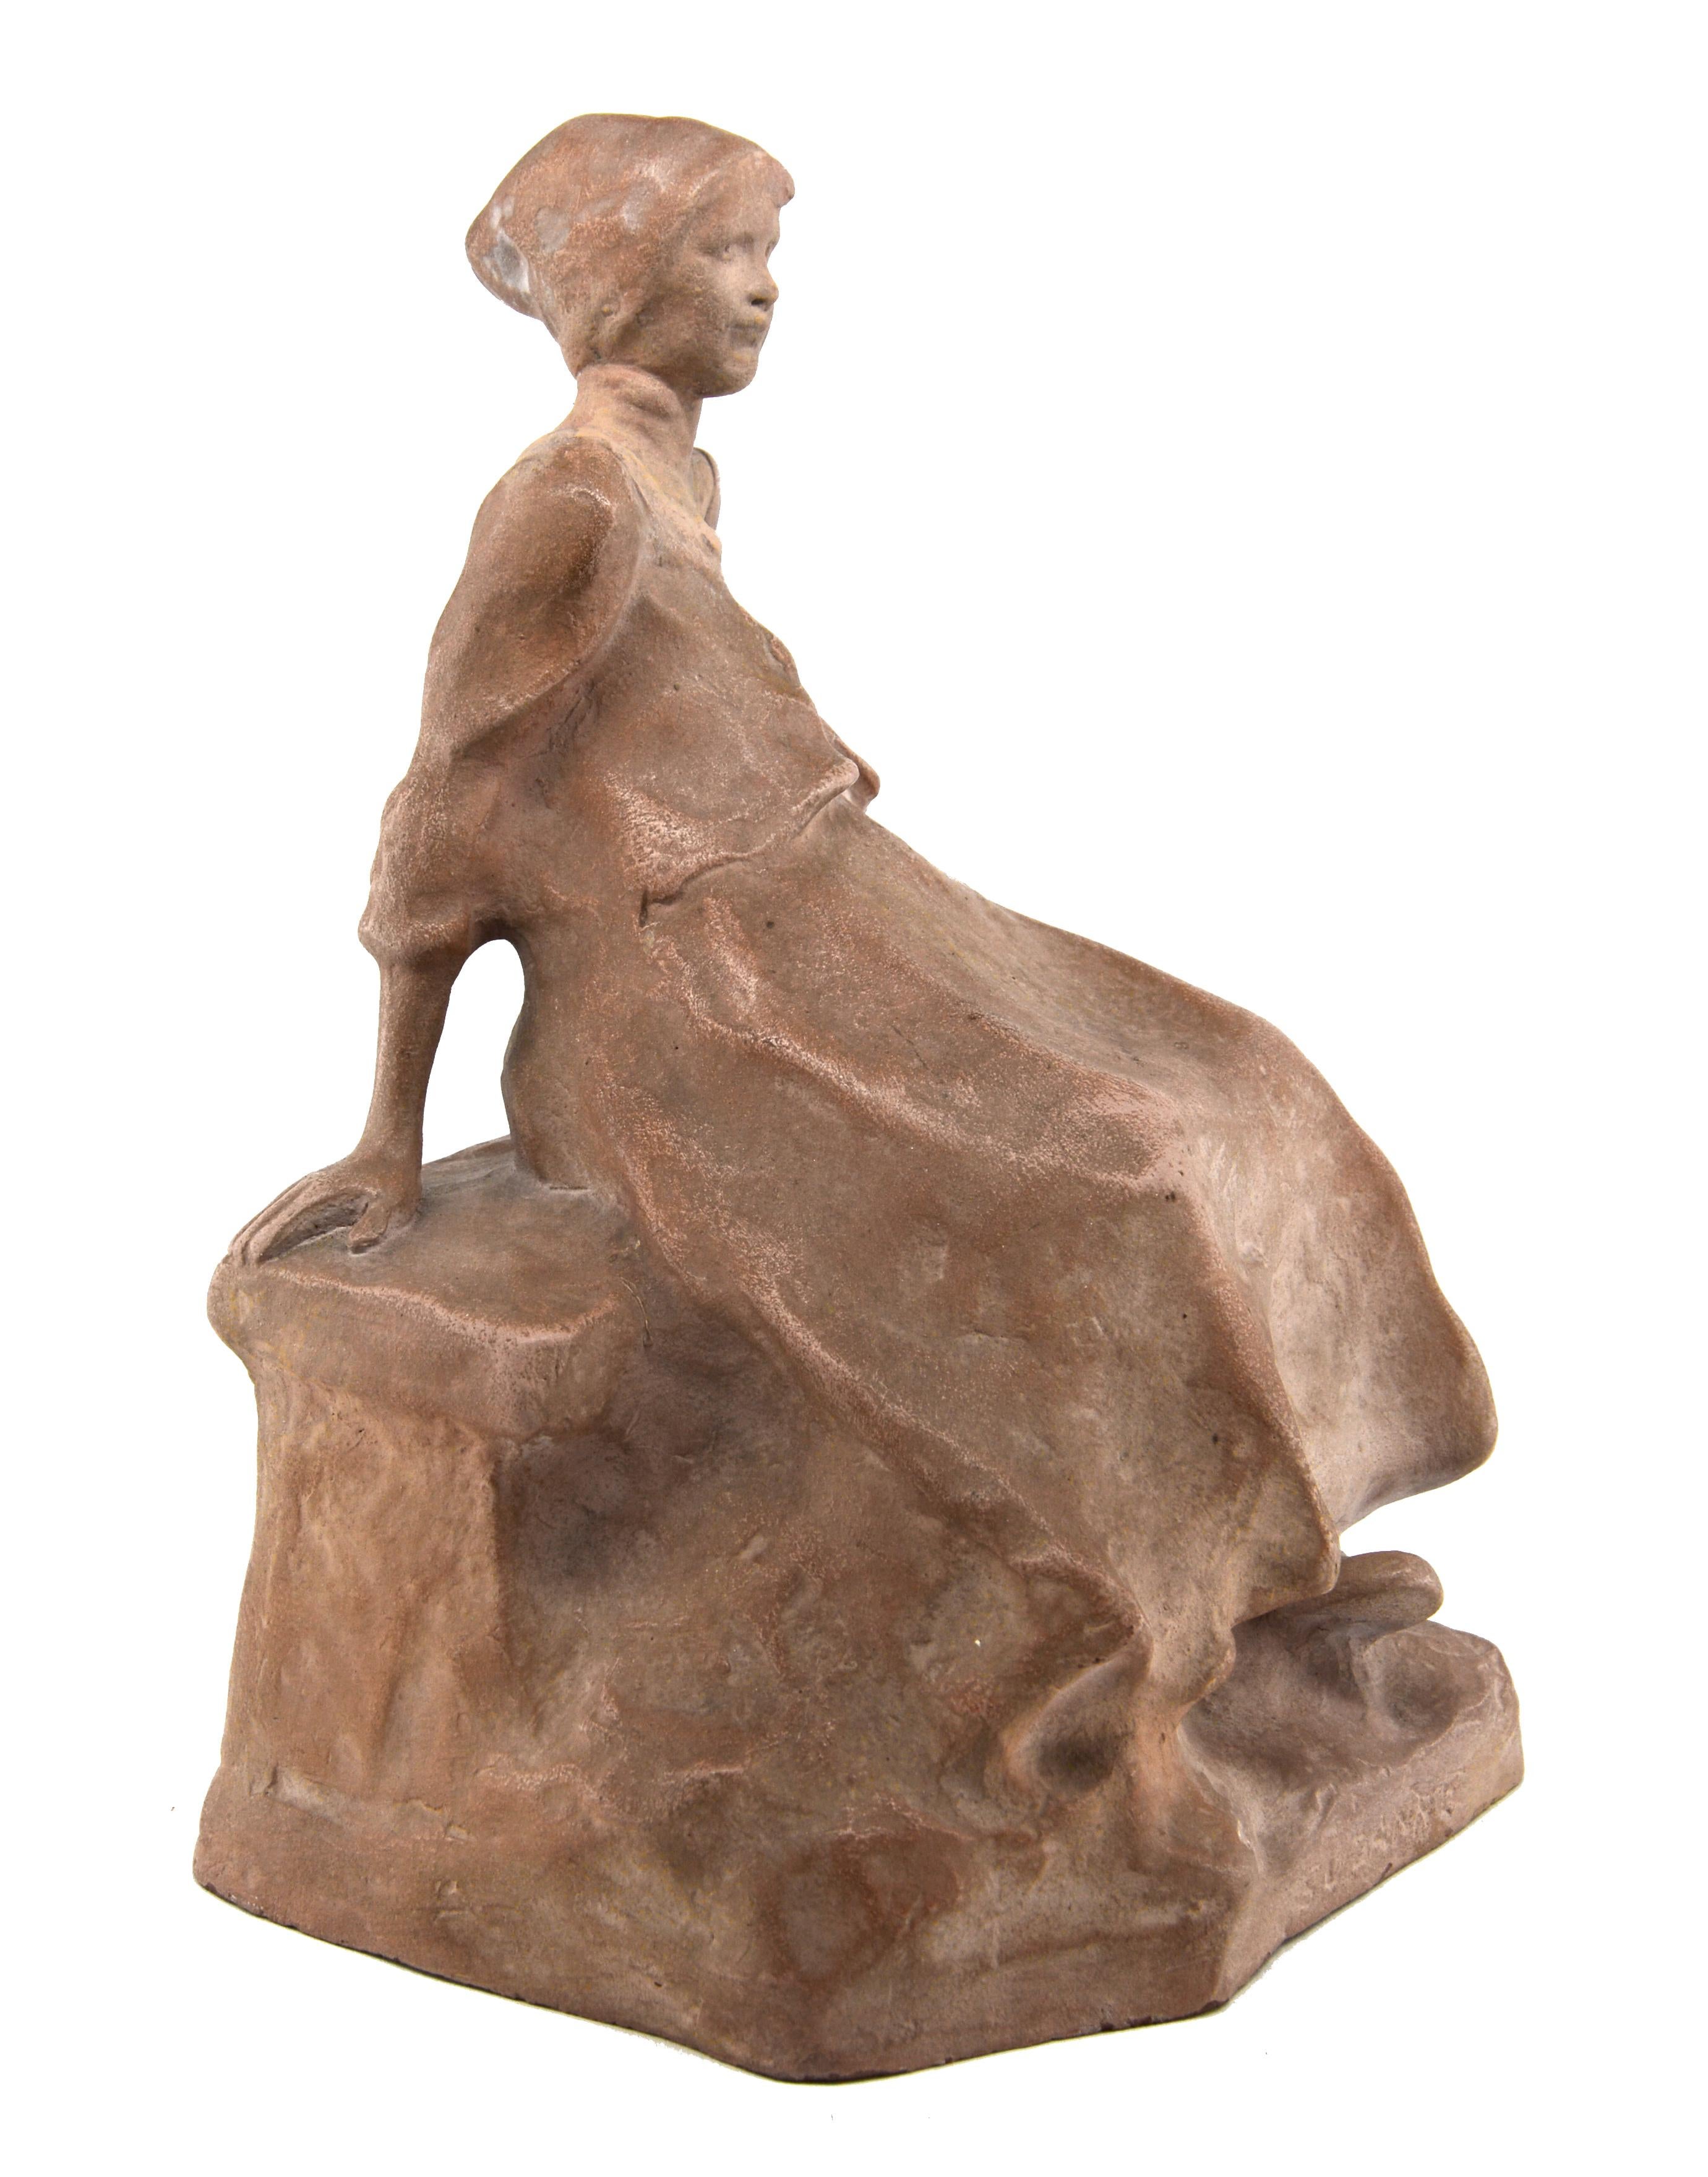 French Art Deco terracotta sculpture by Ruth Milles (1873-1941), Carl Milles sister. School of Paris. France, 1927. 